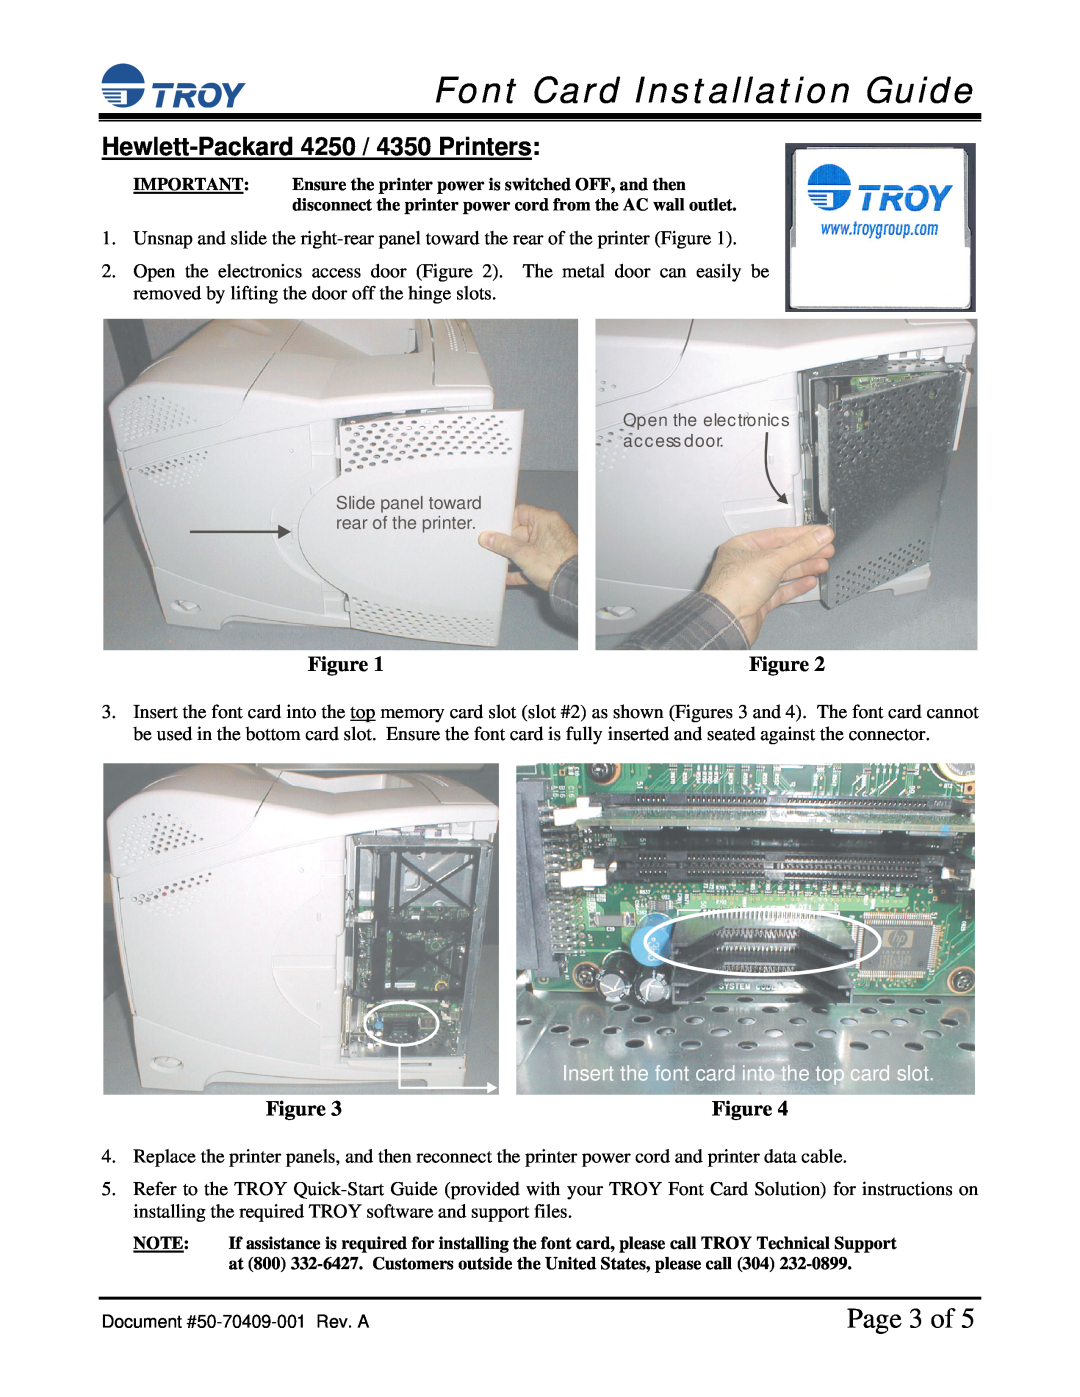 TROY Group HP 9050, HP 4250 / 4350 Page 3 of, Hewlett-Packard 4250 / 4350 Printers, Font Card Installation Guide 